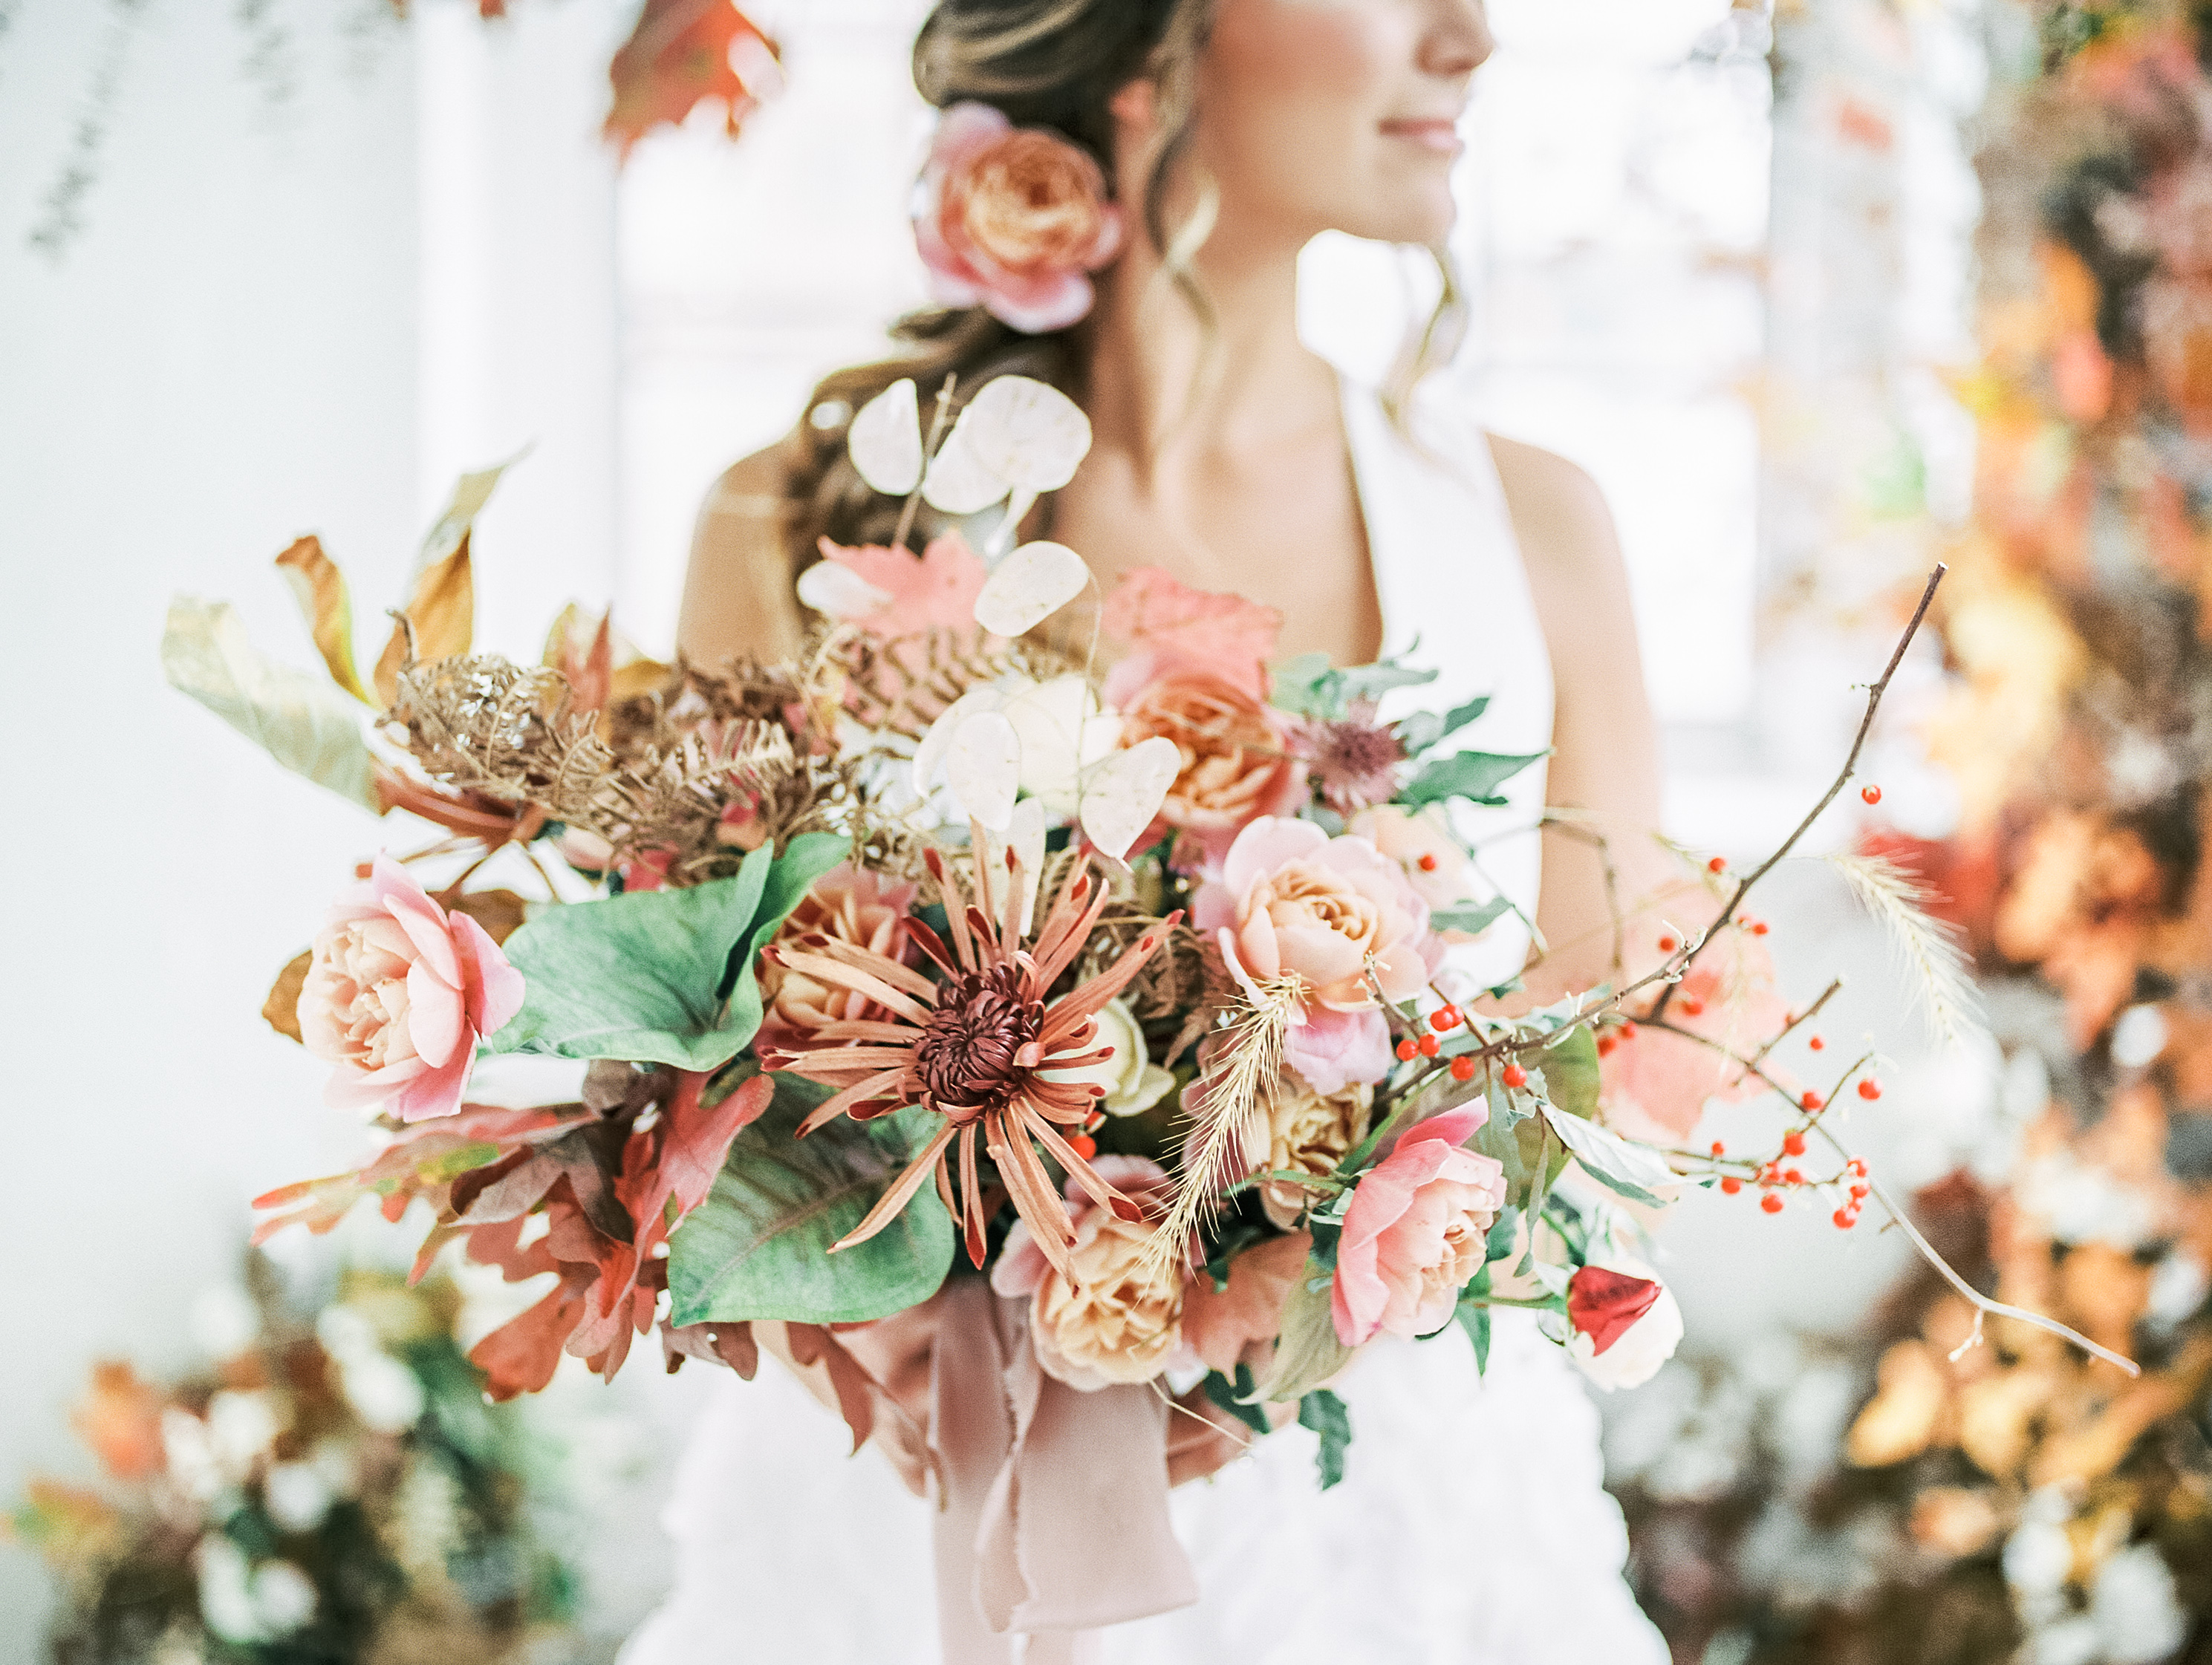 Fall Bridal Bouquet | The Day's Design | Samantha James Phtoography